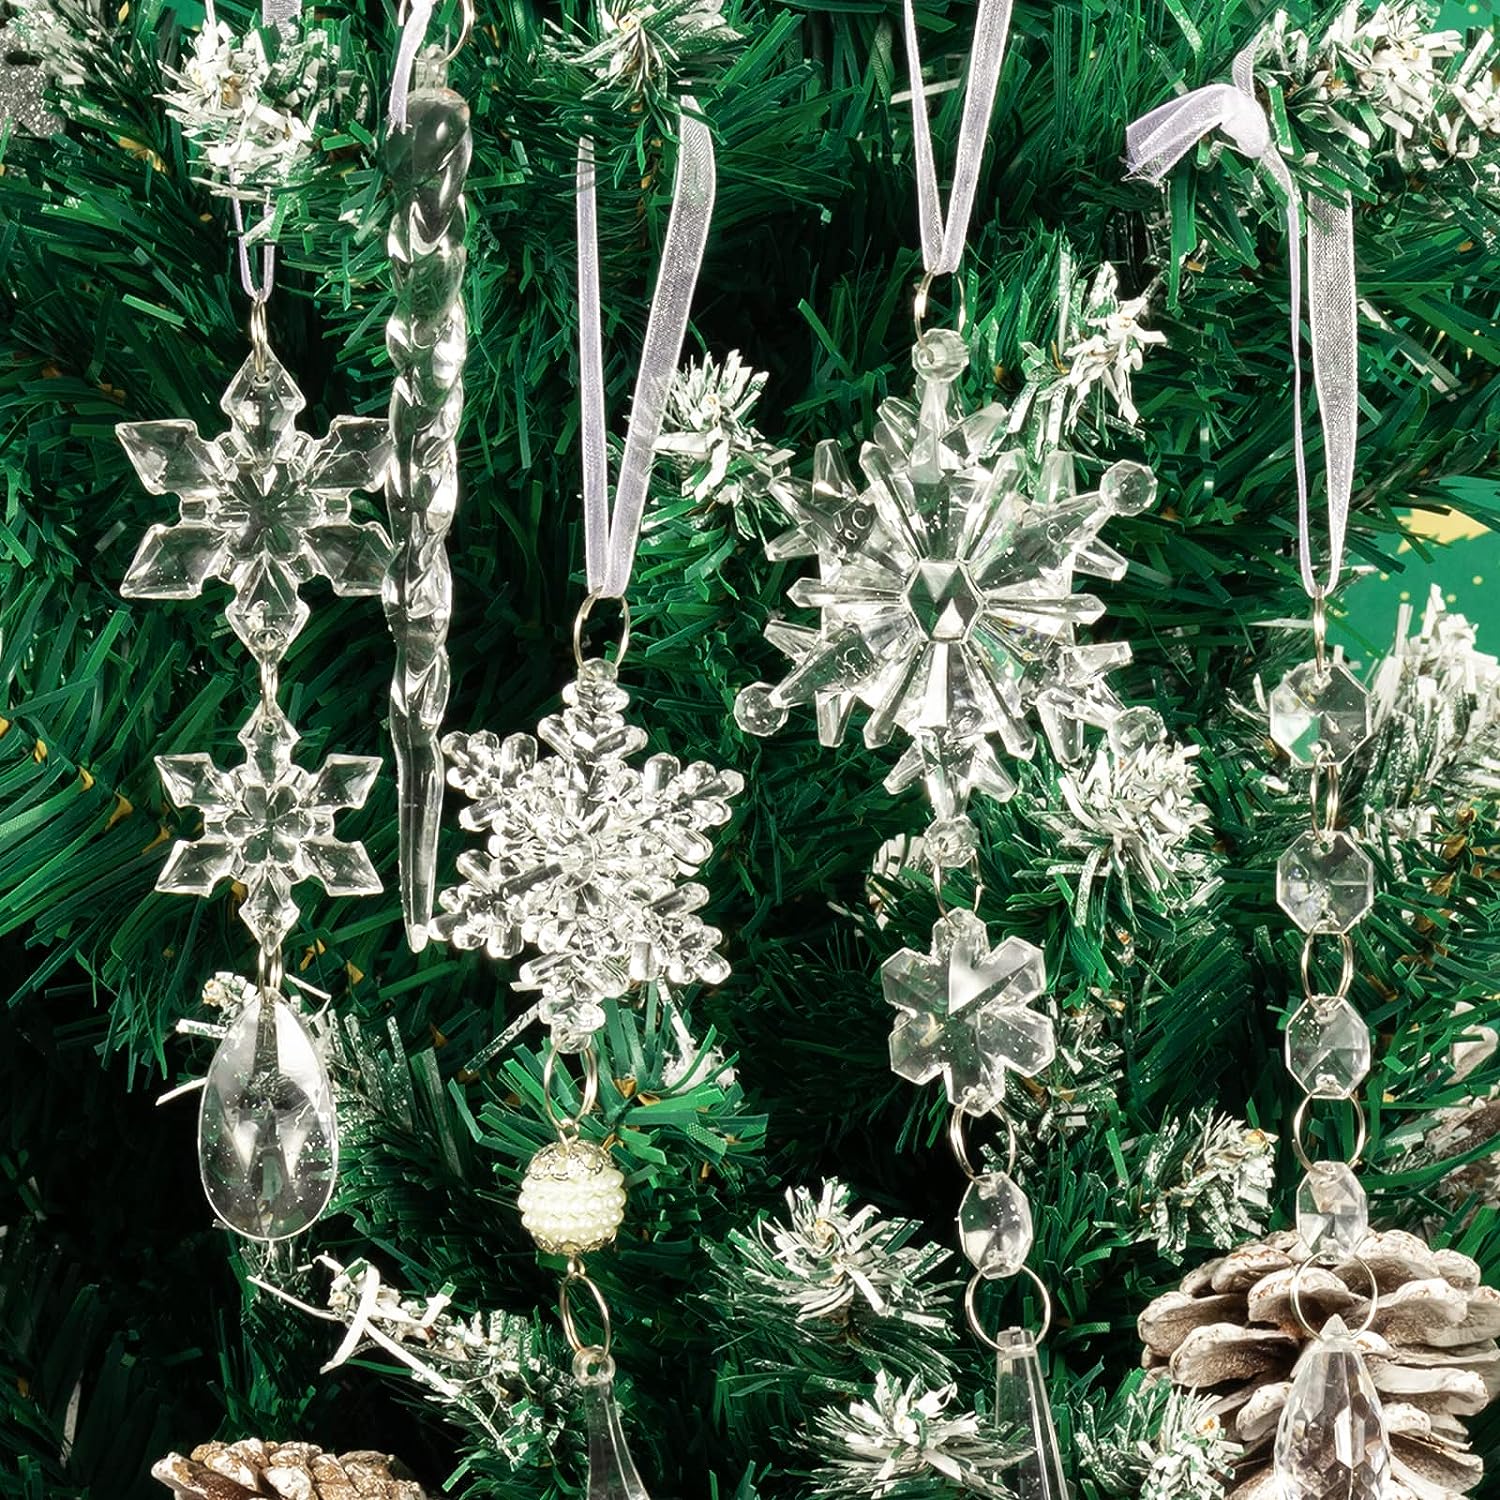 18pcs Crystal Christmas Ornaments for Christmas Tree Decorations-Hanging  Acrylic Snowflake and Icicle Ornaments with Drop Pendants for Christmas Tree  New Year Party Decorations Supplies